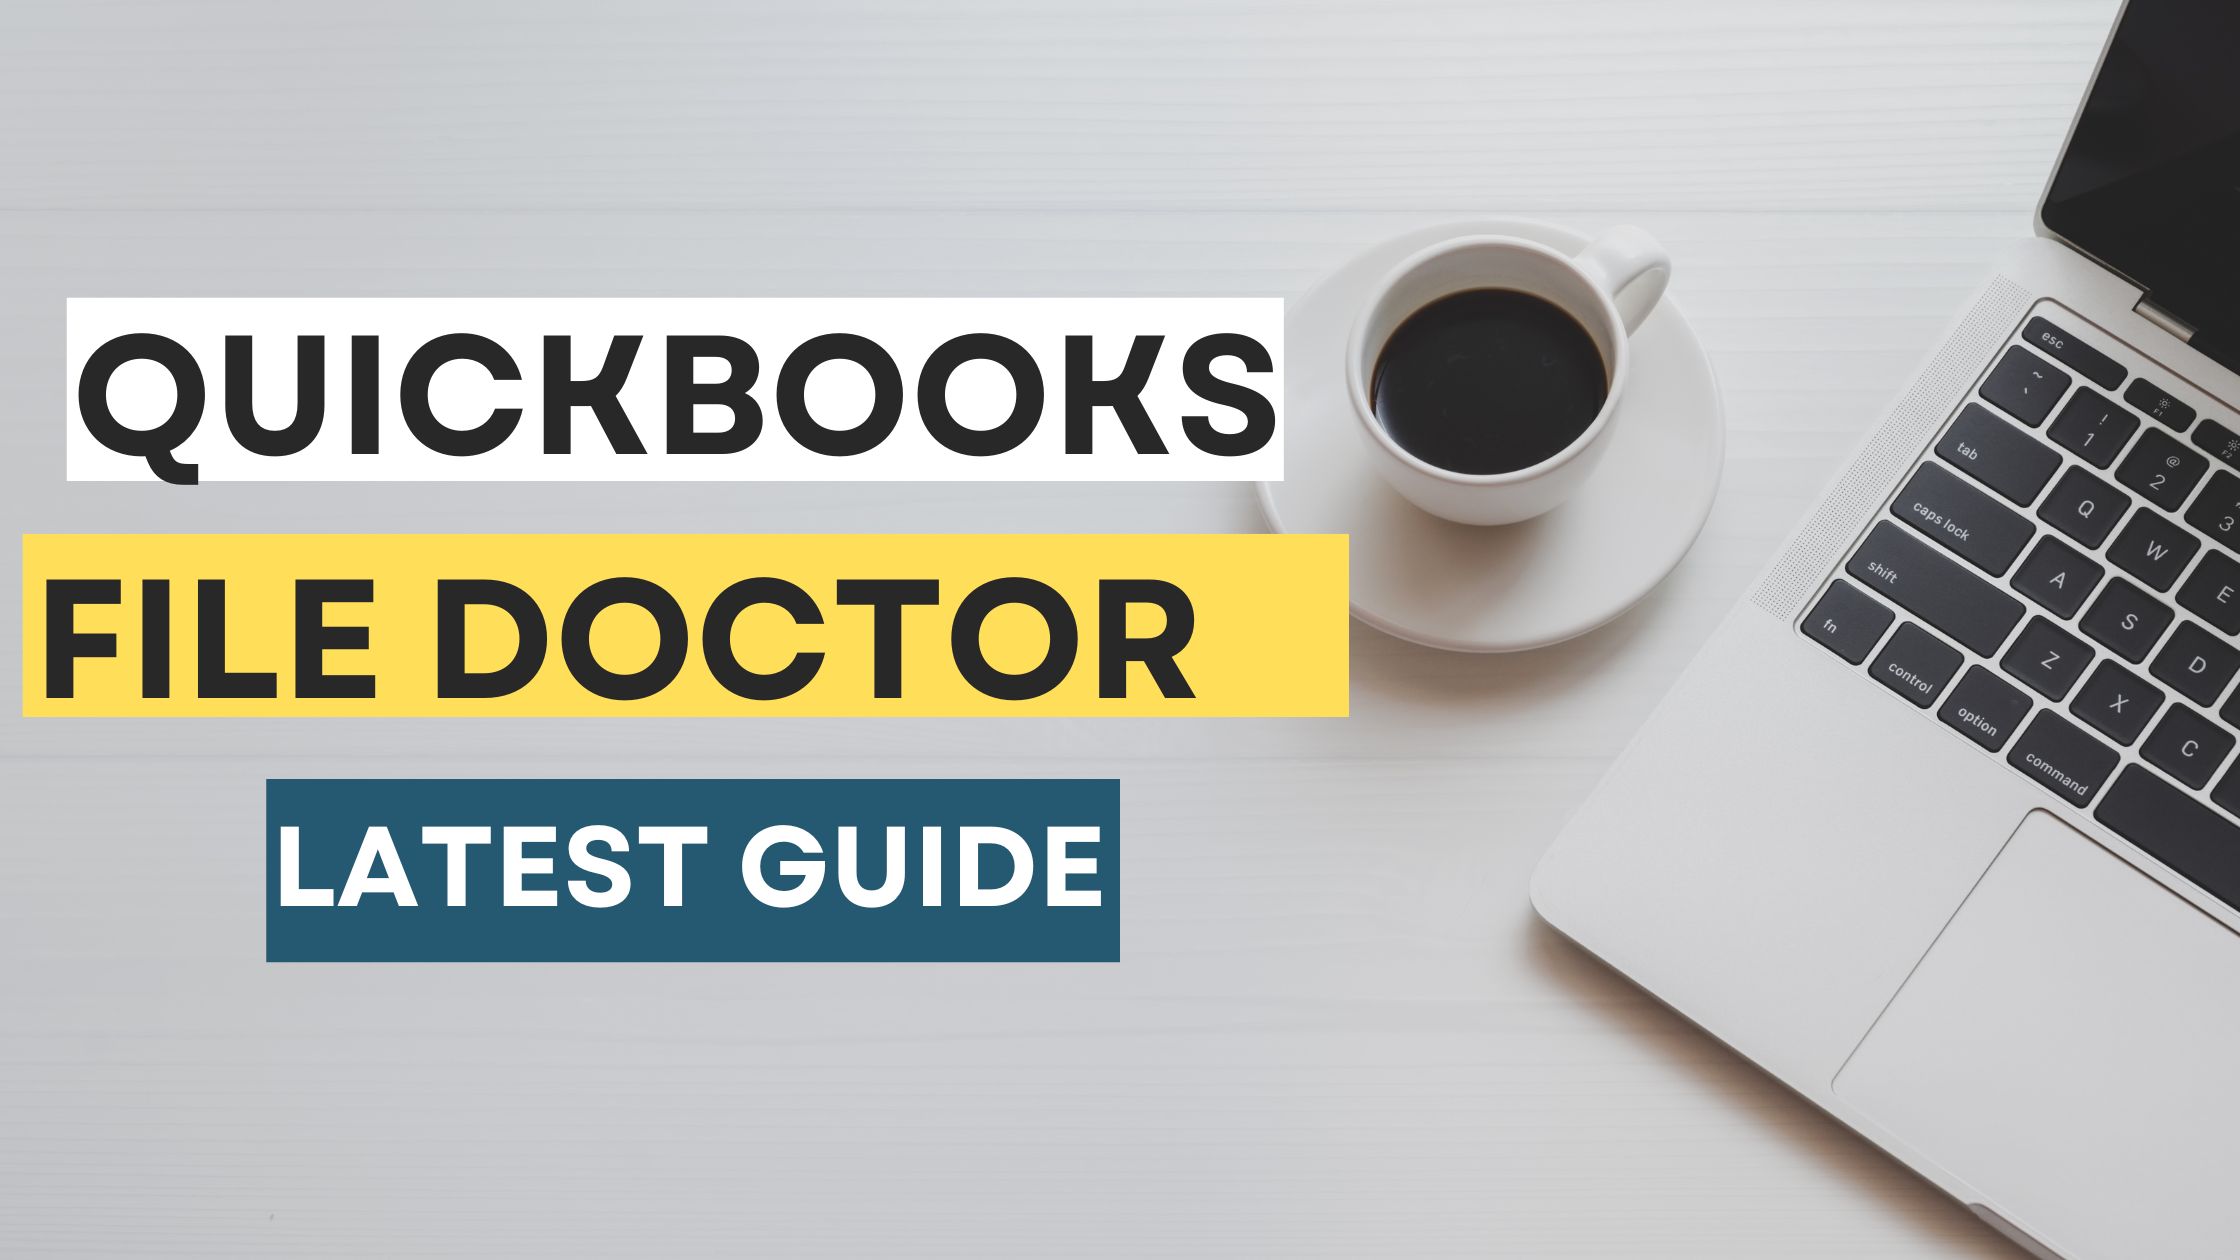 QuickBooks File Doctor: The Ultimate Tool for Resolving Data Damage Issues